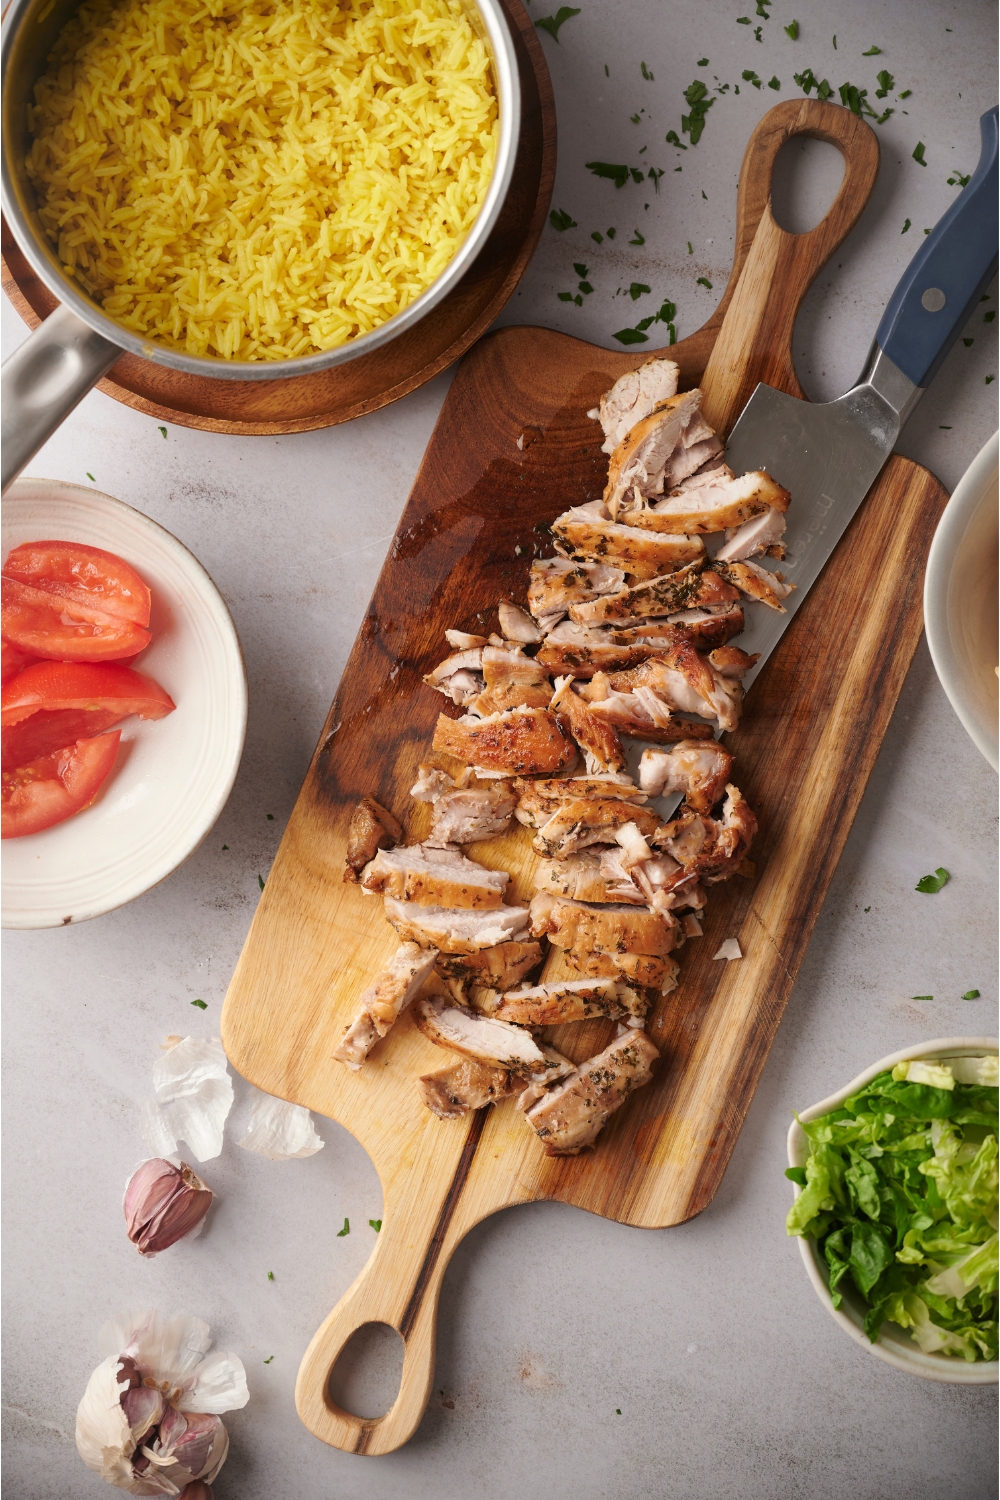 Seasoned chicken sliced thin on a wooden cutting board. There is a knife on the cutting board. Surrounding the chicken is an assortment of ingredients including a pot of yellow rice, tomatoes, garlic, and shredded lettuce.